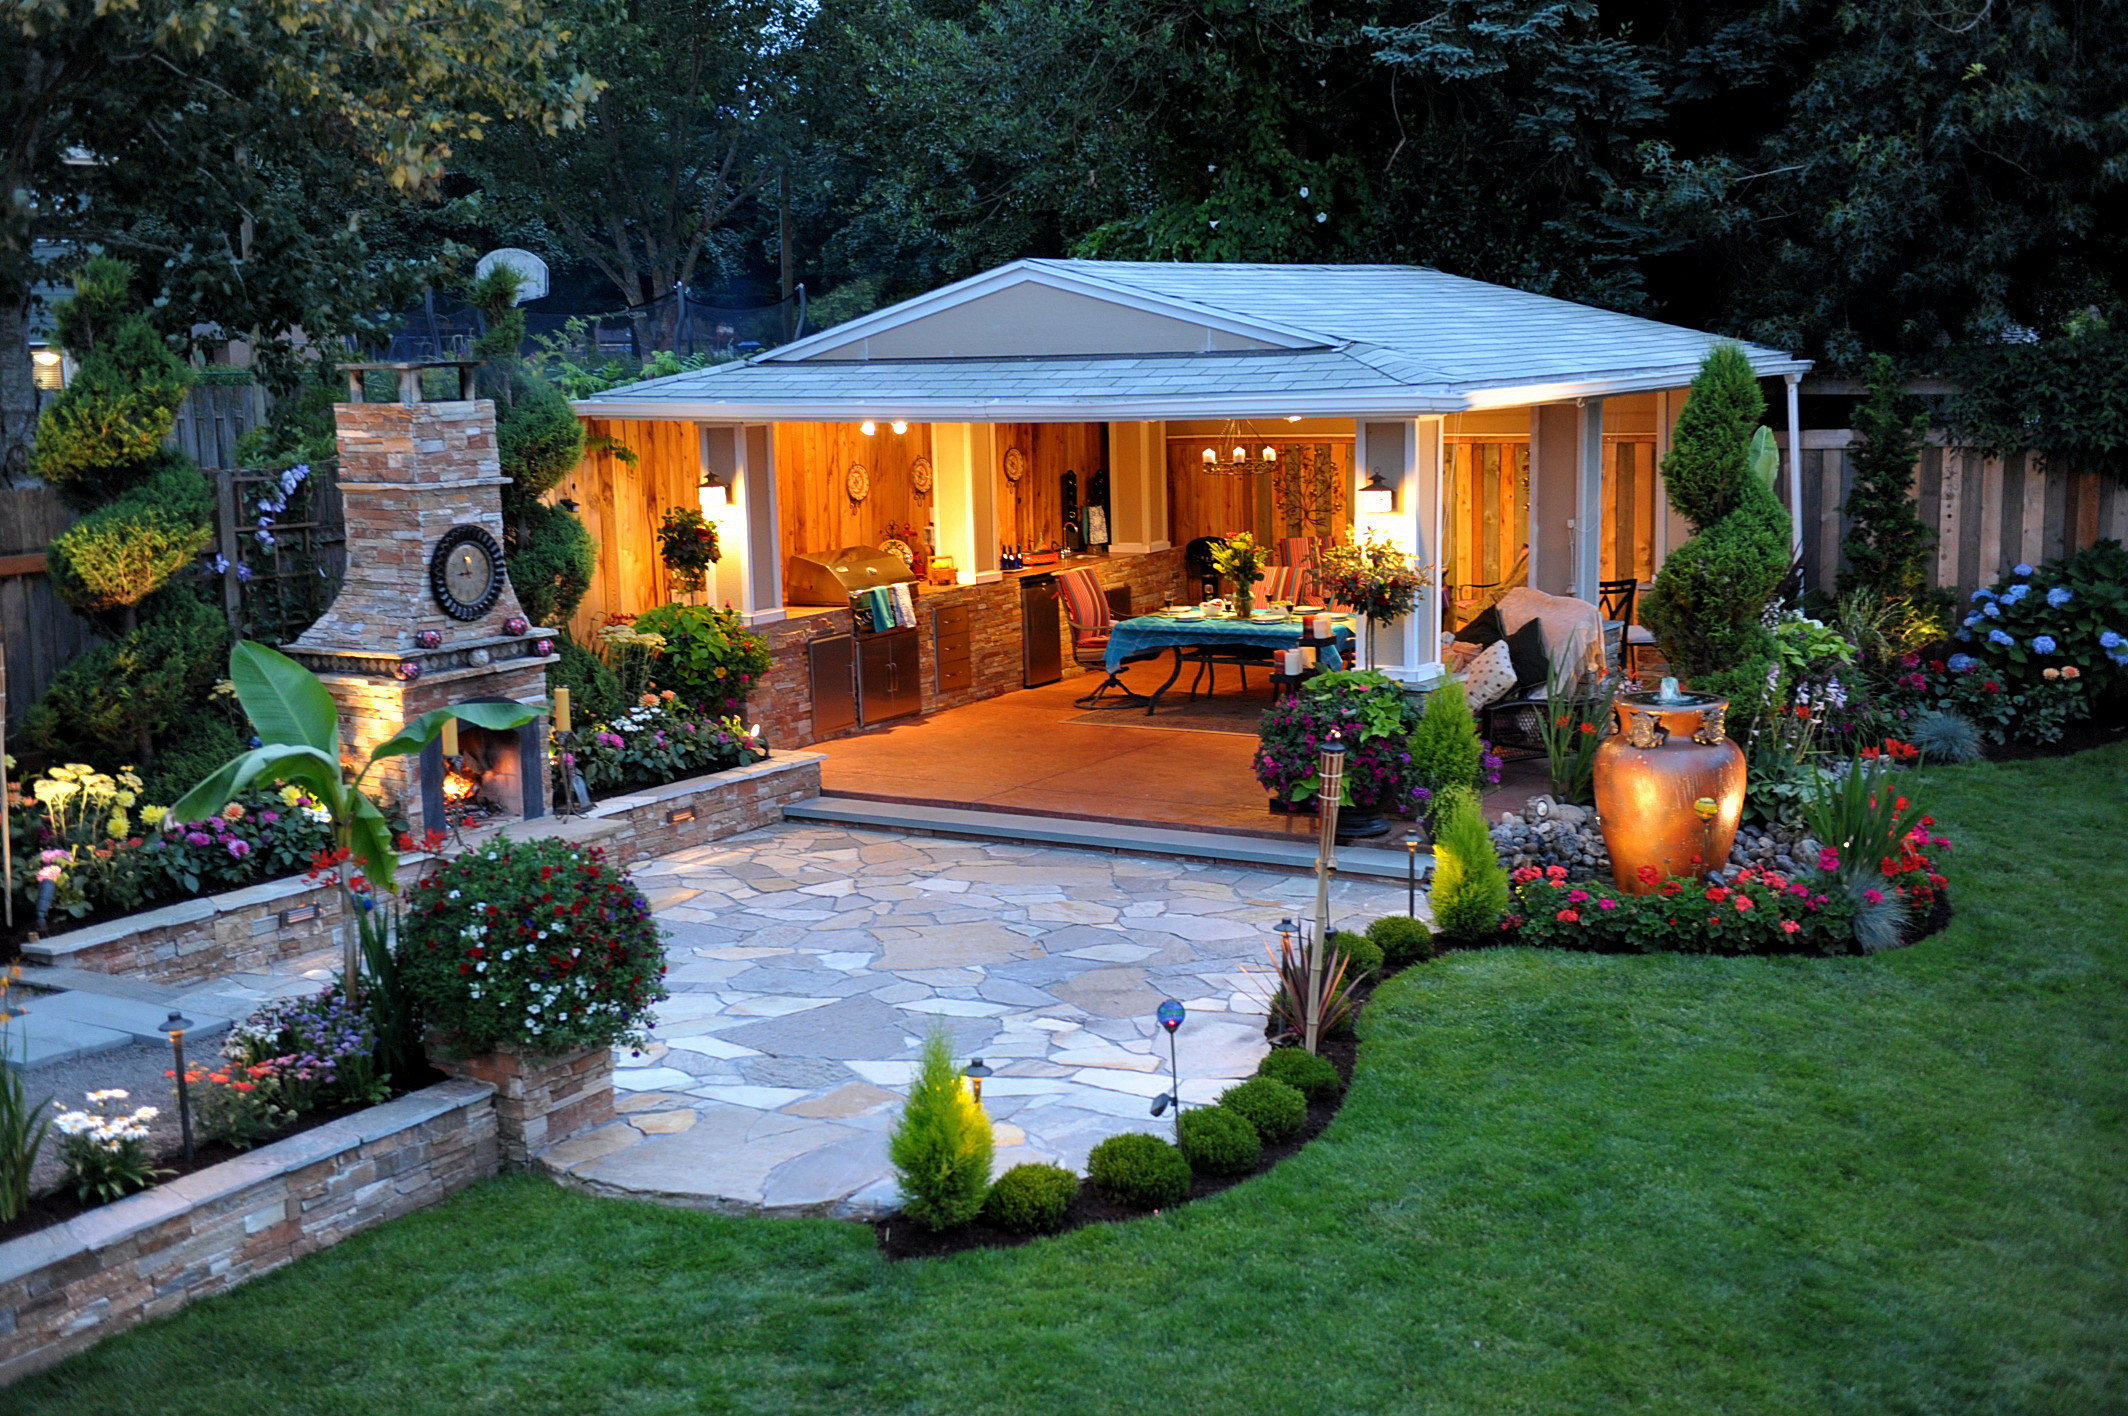  outdoor kitchen let us help you design your outdoor kitchen patios